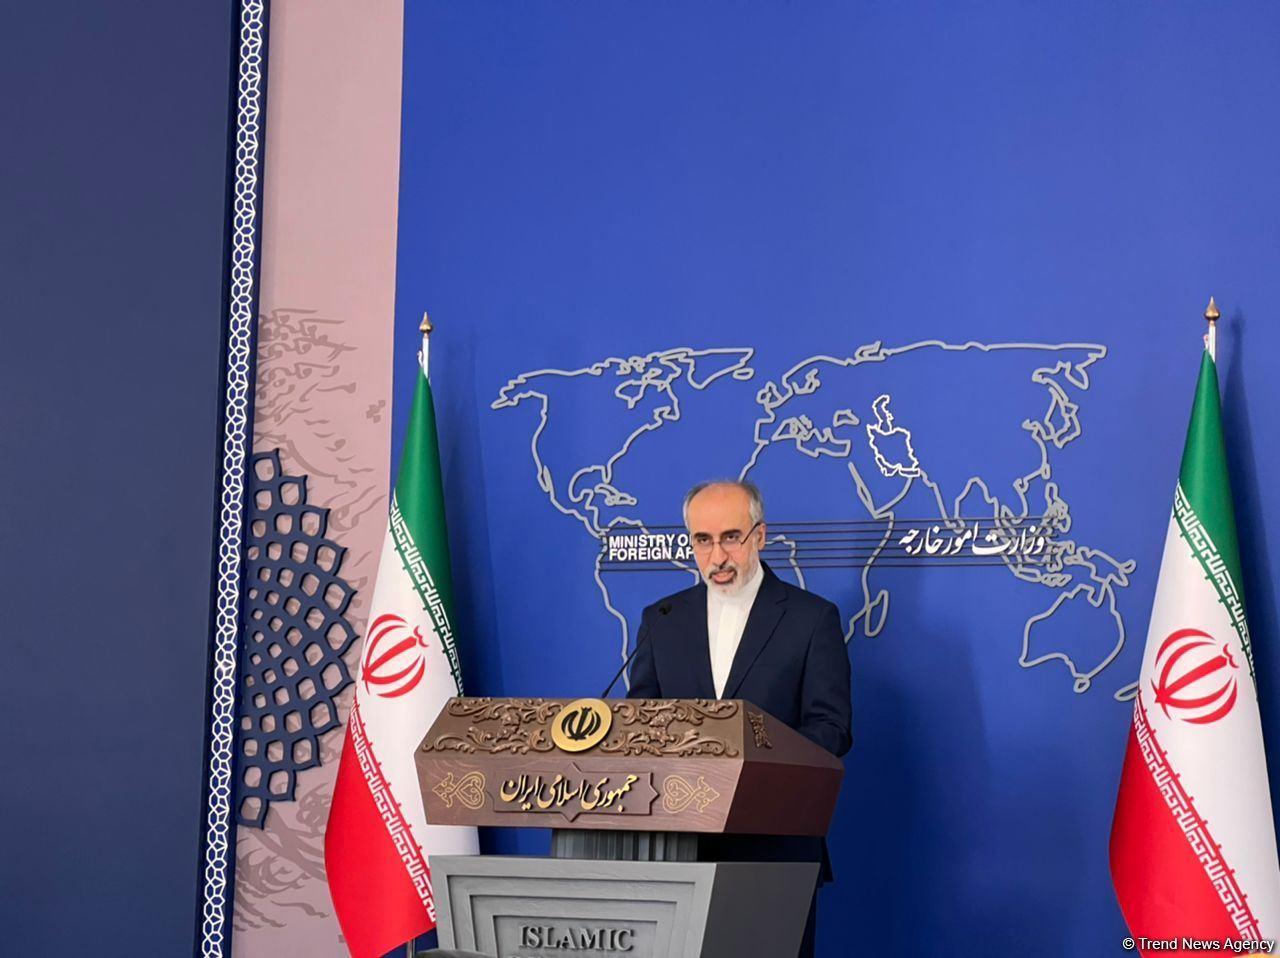 US Has No Right To Interfere In Relations Between Iran And Azerbaijan - Iran's MFA